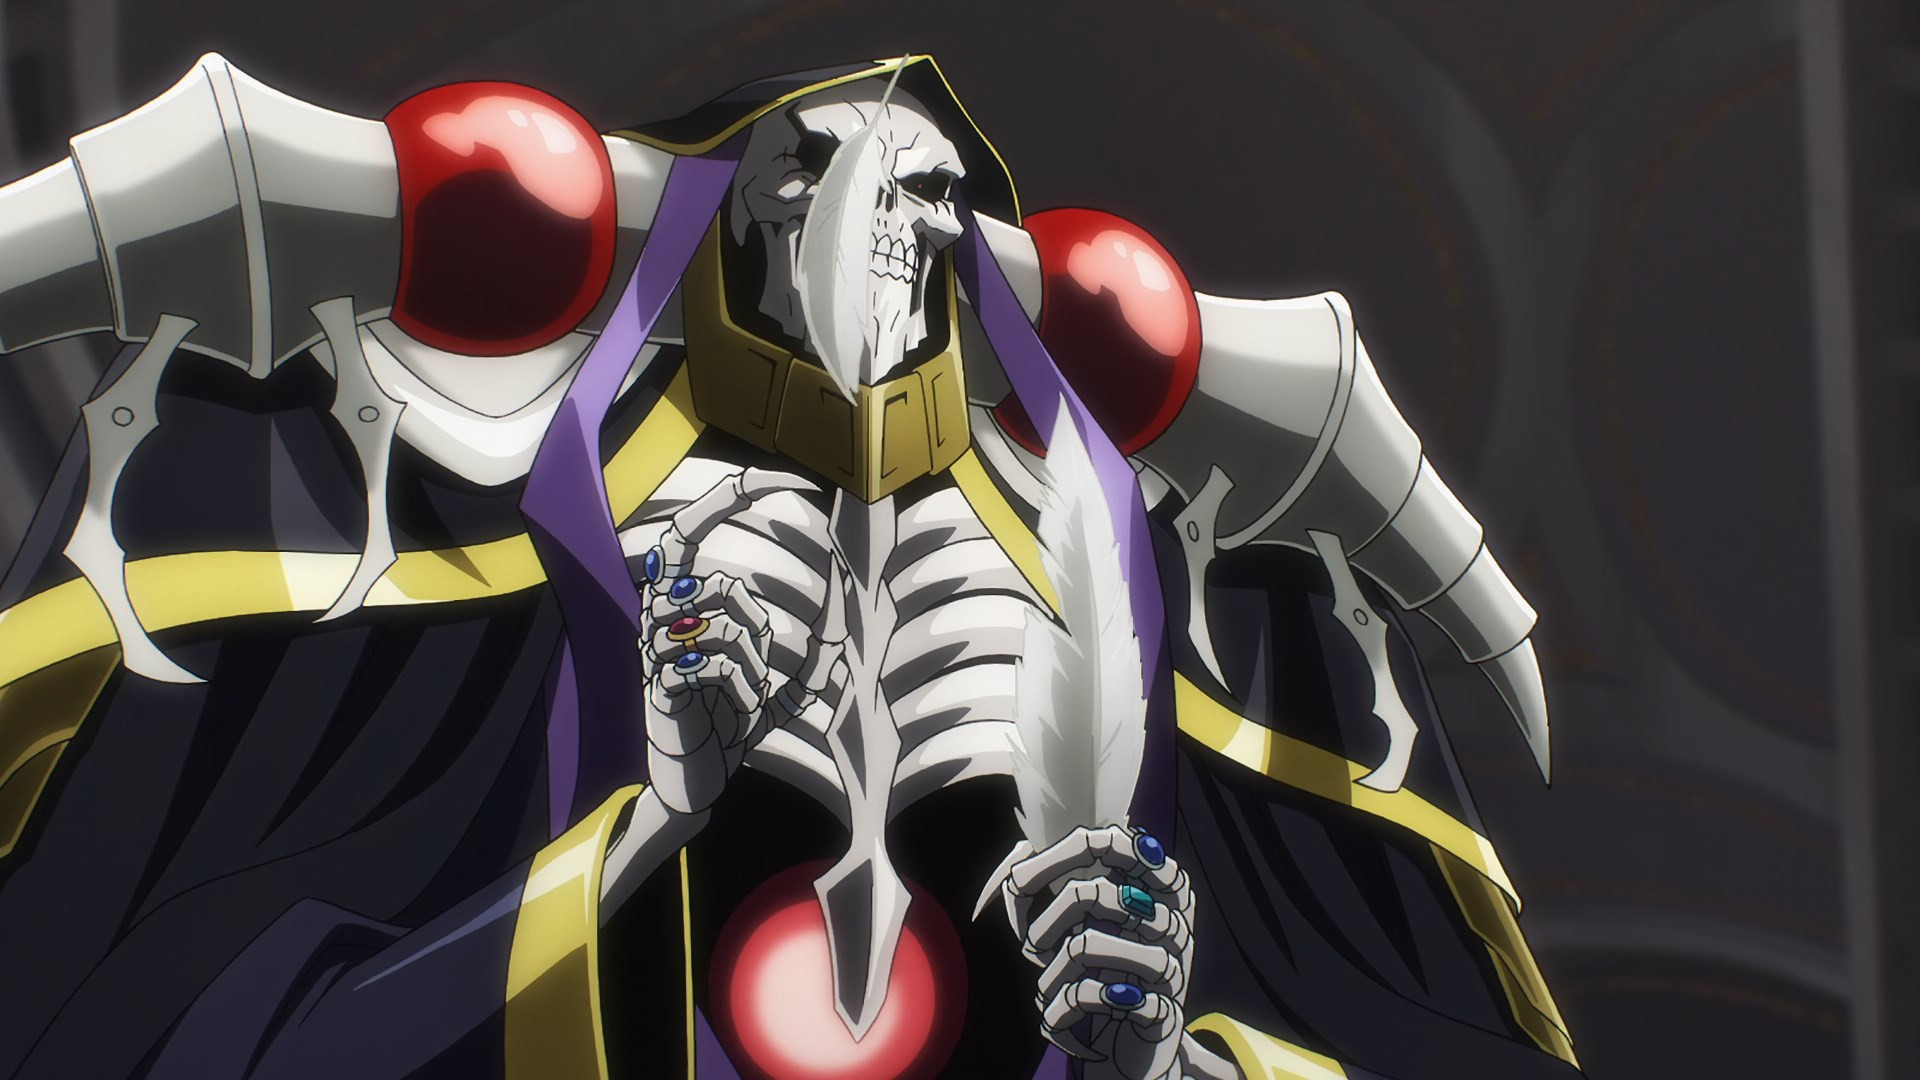 Should I Watch Overlord IV? Overlord IV